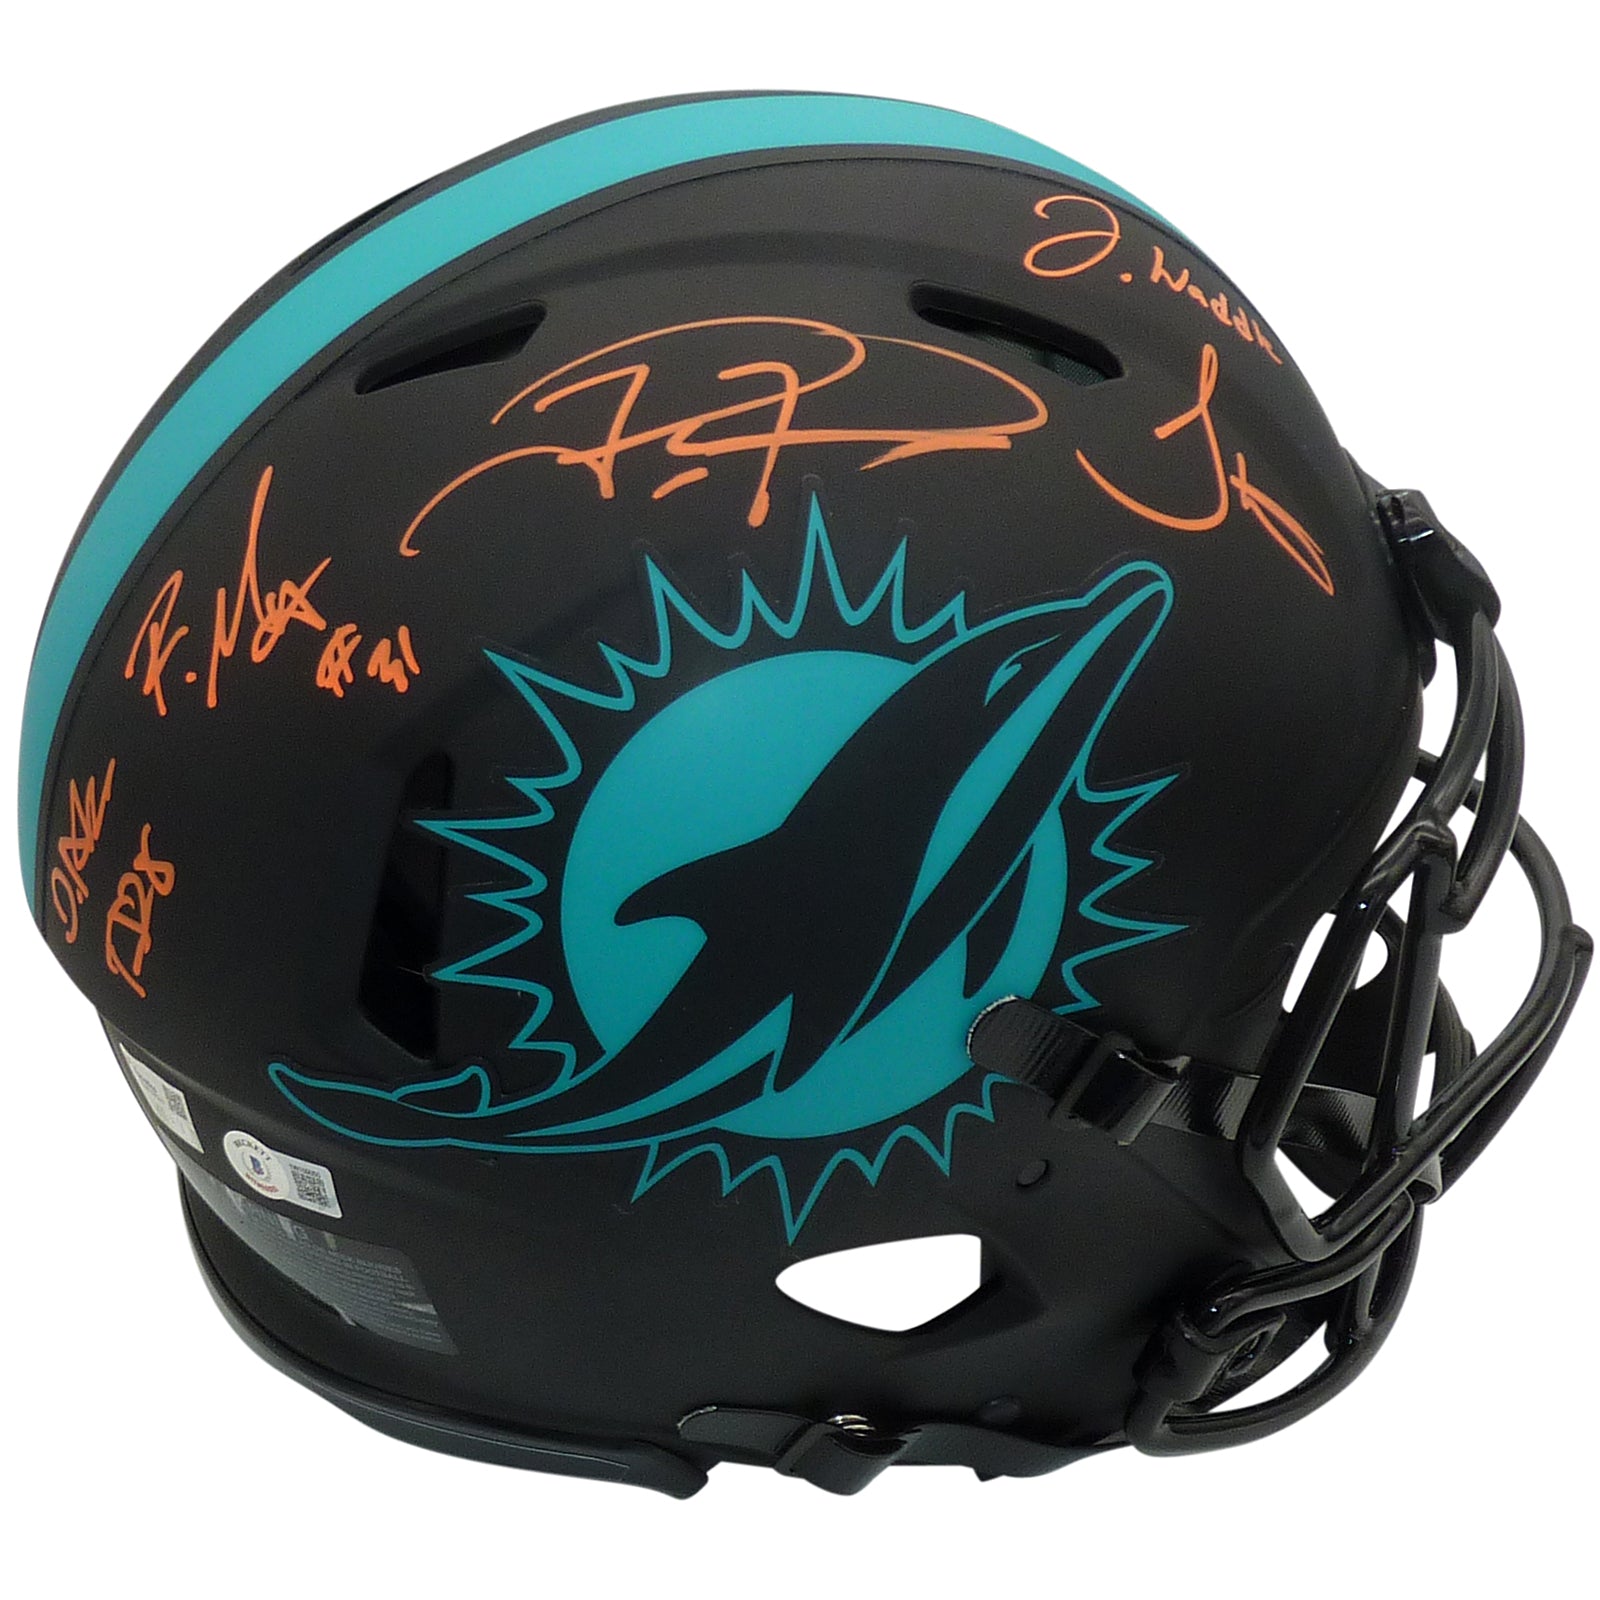 Achane , Hill , Mostert , Tagovailoa and Waddle Autographed Miami Dolphins (ECLIPSE Alternate) Authentic Proline Helmet - Fanatics